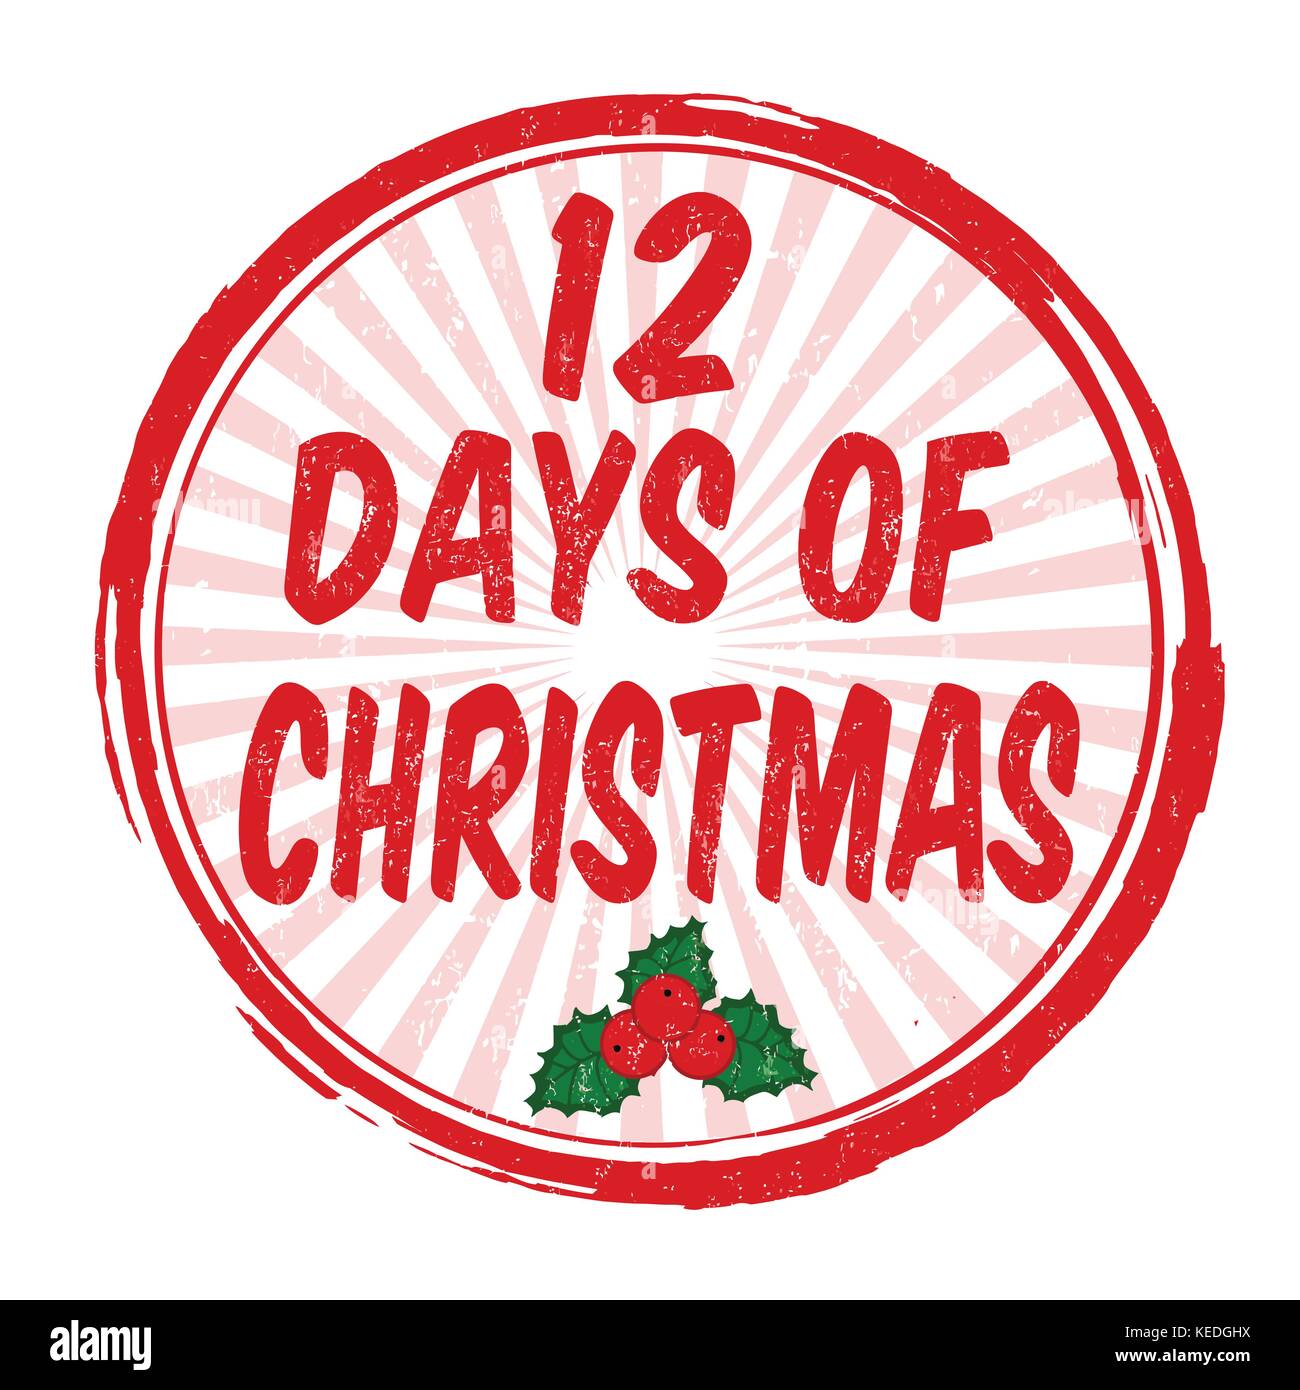 12 days of christmas Cut Out Stock Images & Pictures - Alamy